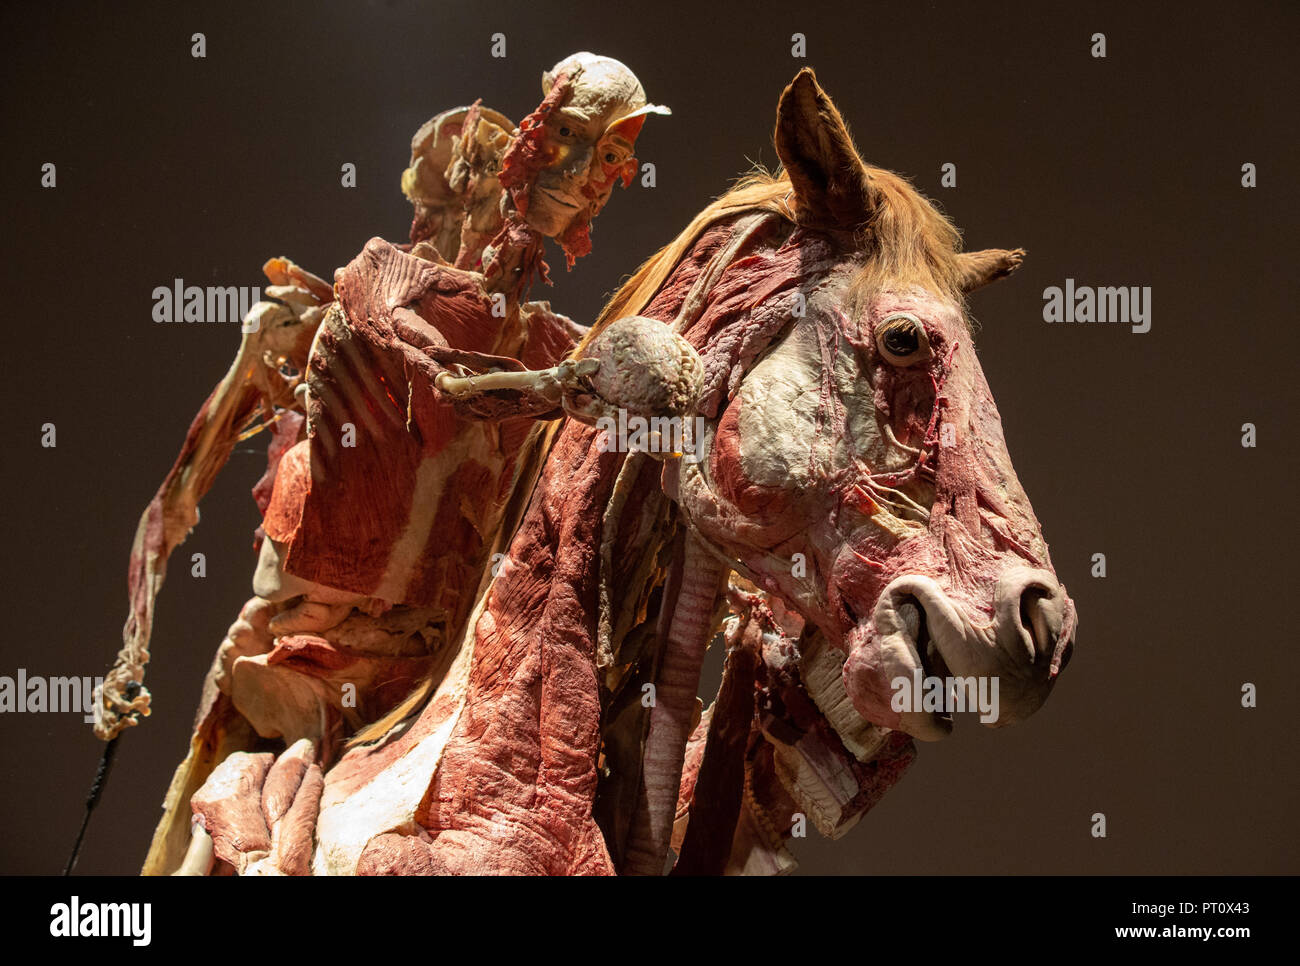 Detail of 'Rearing Horse with Rider' by Dr Gunther Von Hagens  at the preview of his 'Body Worlds' Exhibition which opened at The London Pavilion Oct . Stock Photo